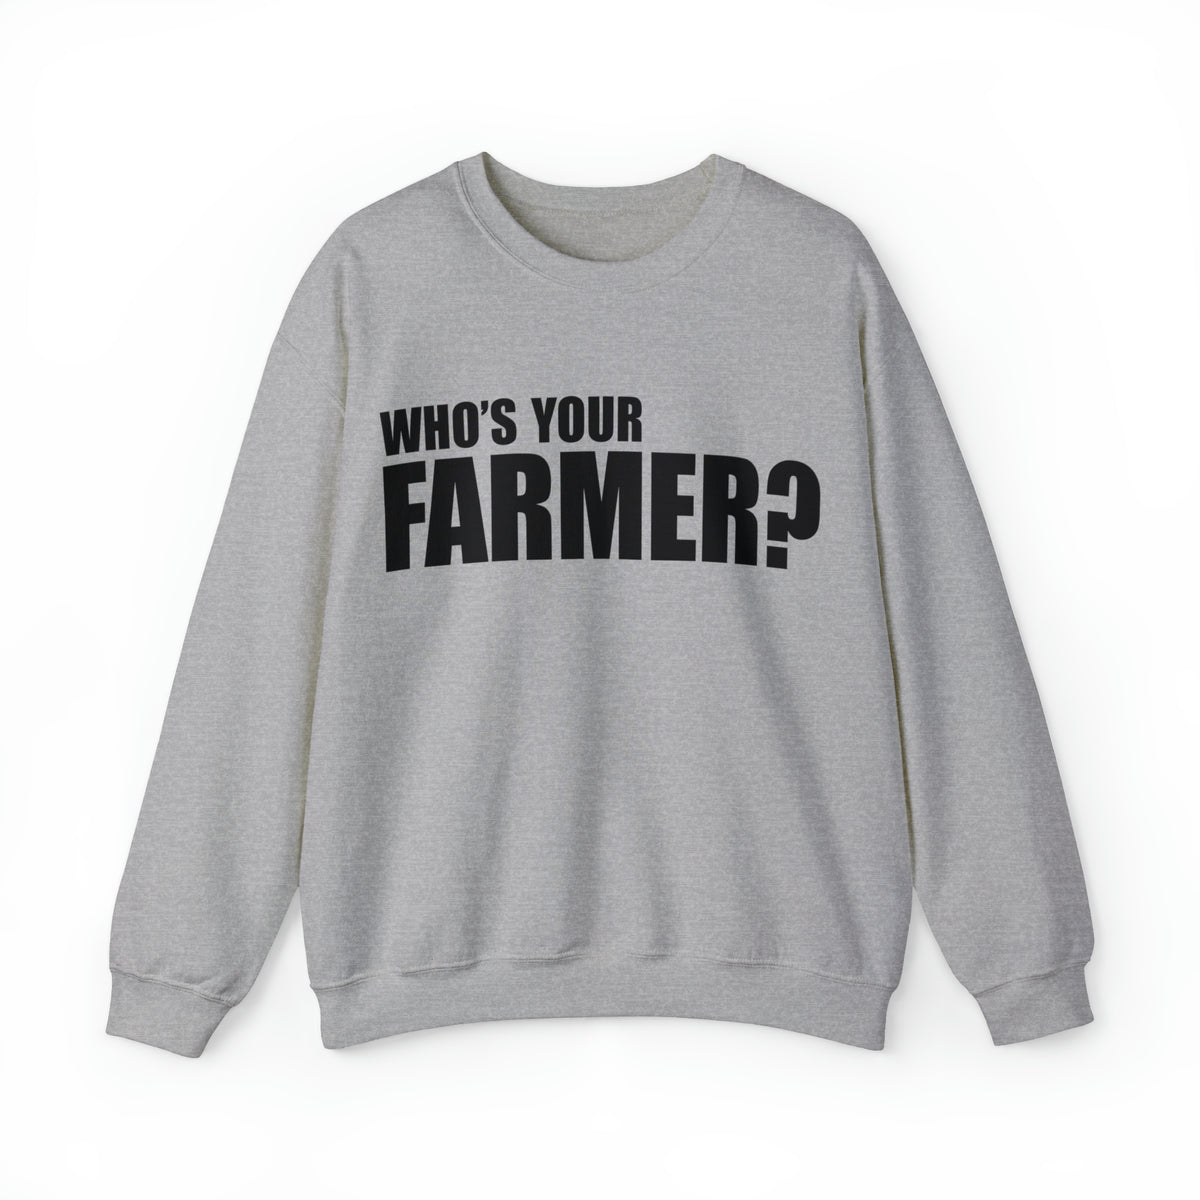 Who's your farmer?